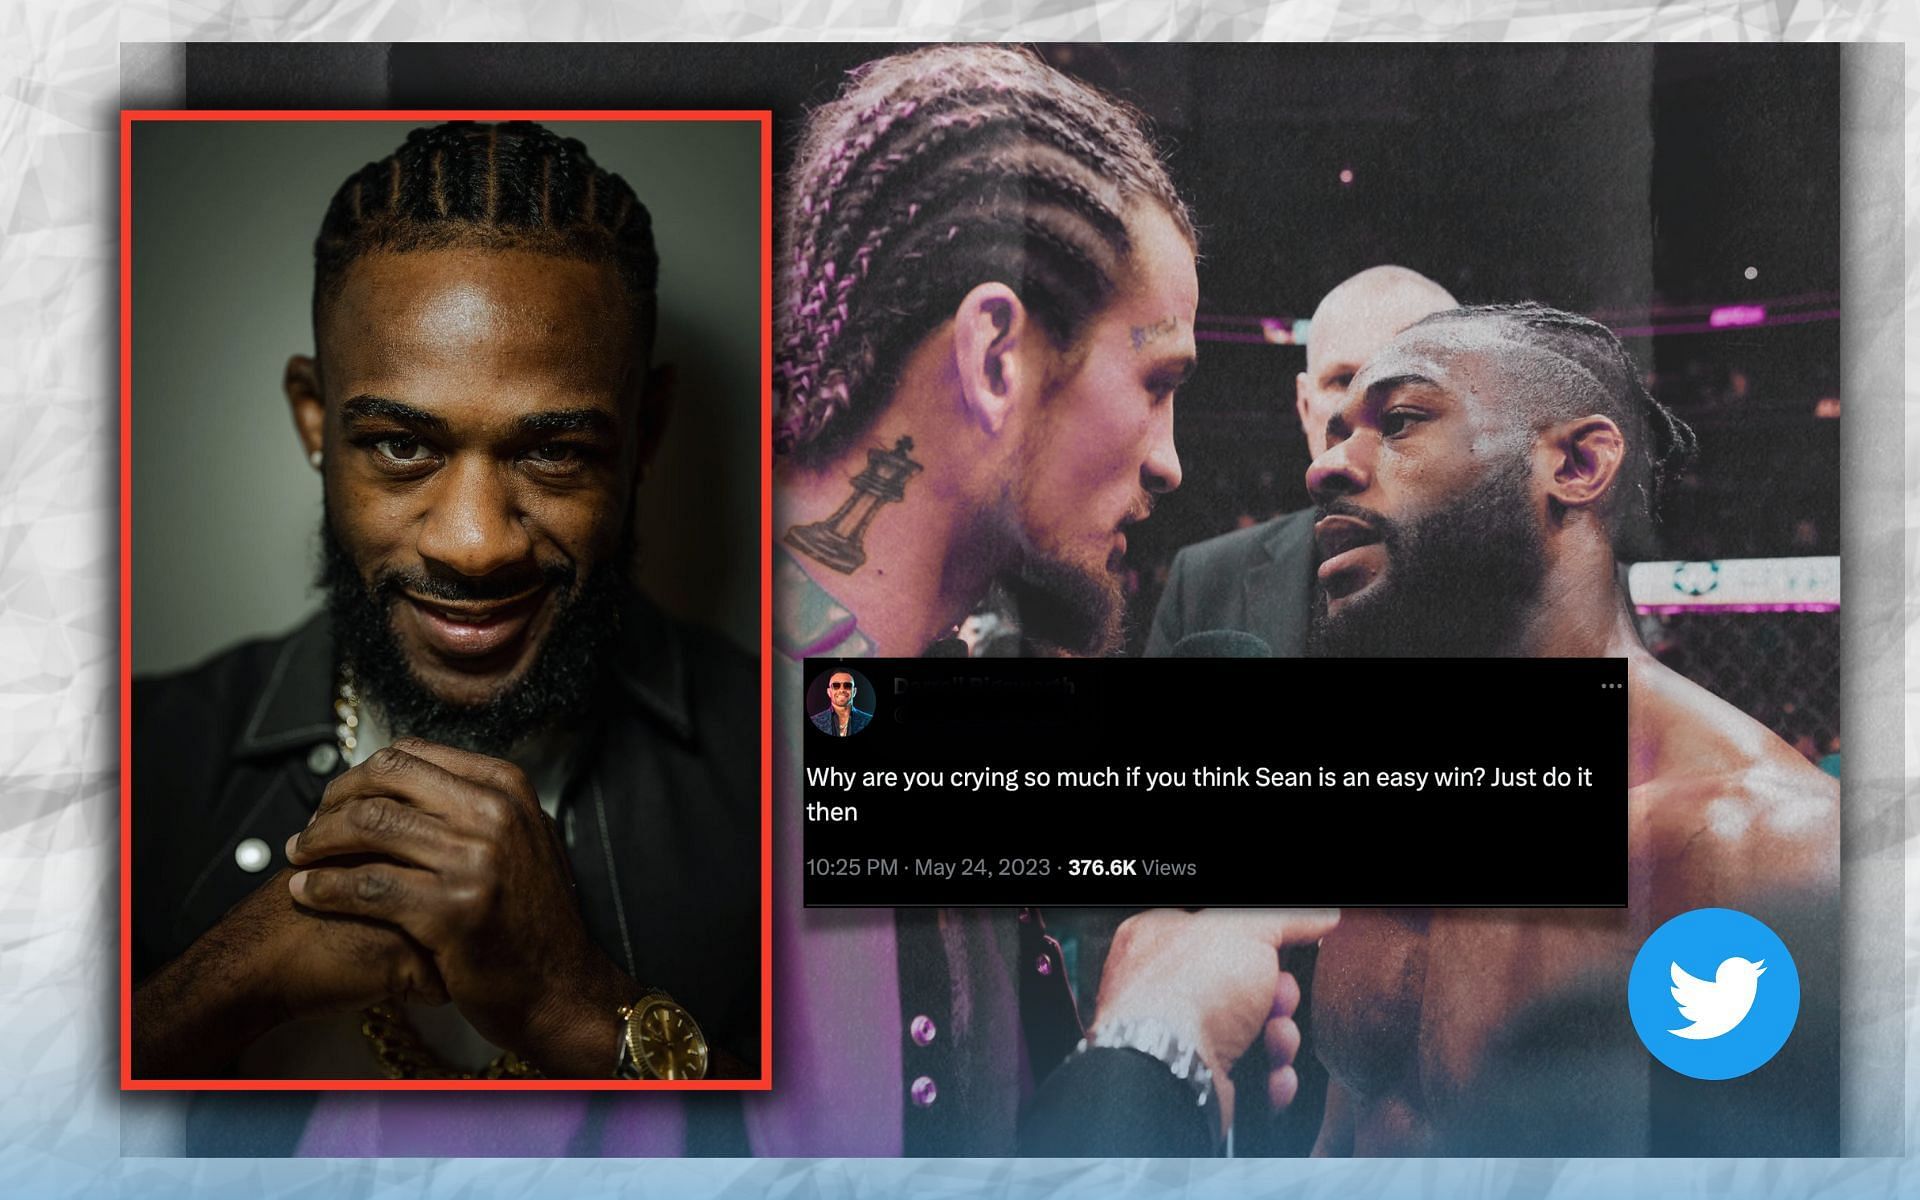 Aljamain Sterling clarifies after fan calls him out for allegedly considering Sean O